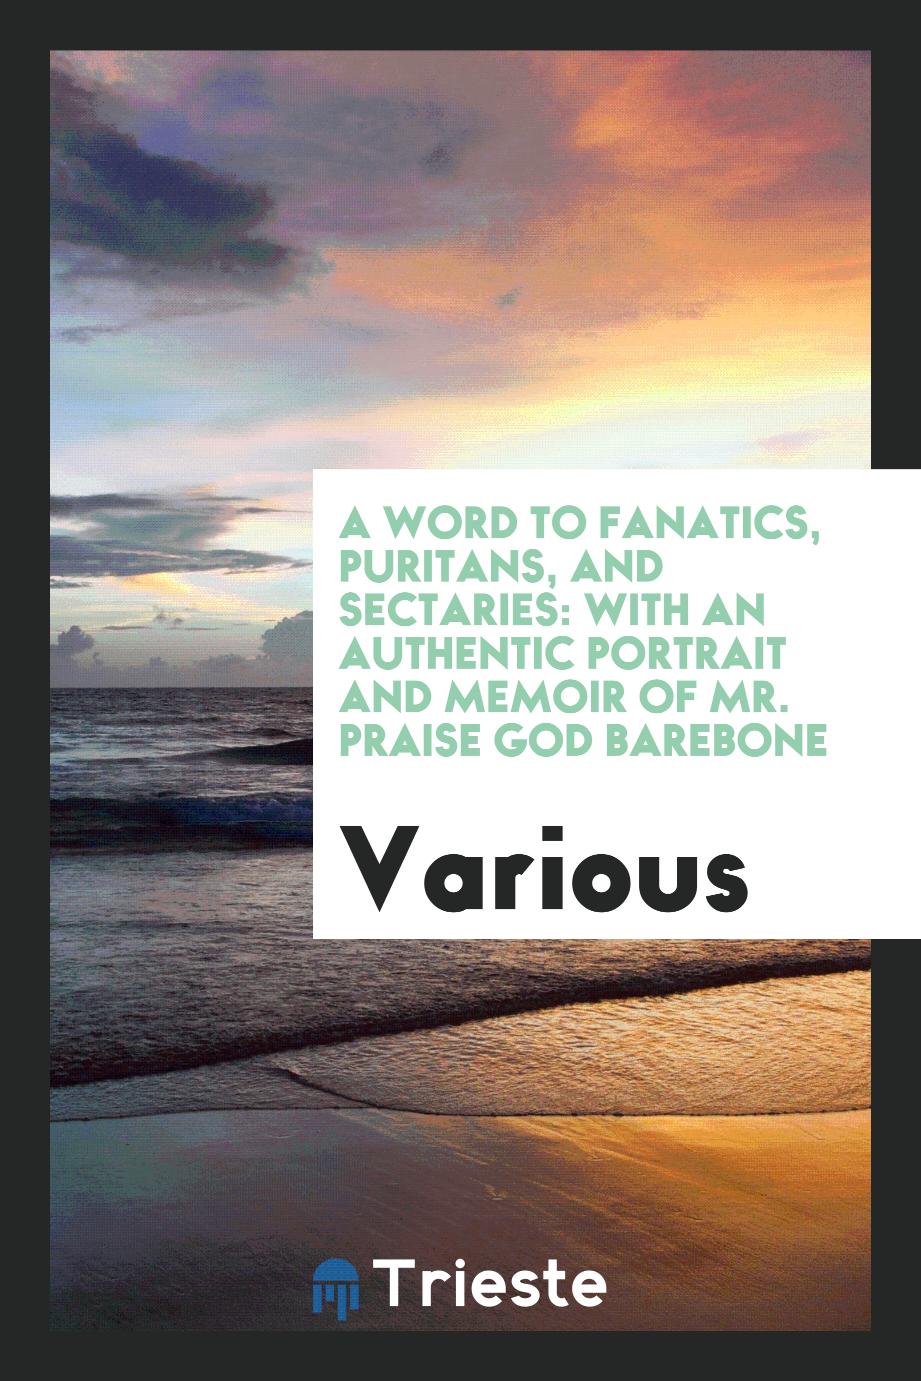 A Word to Fanatics, Puritans, and Sectaries: With an authentic portrait and memoir of Mr. Praise God Barebone